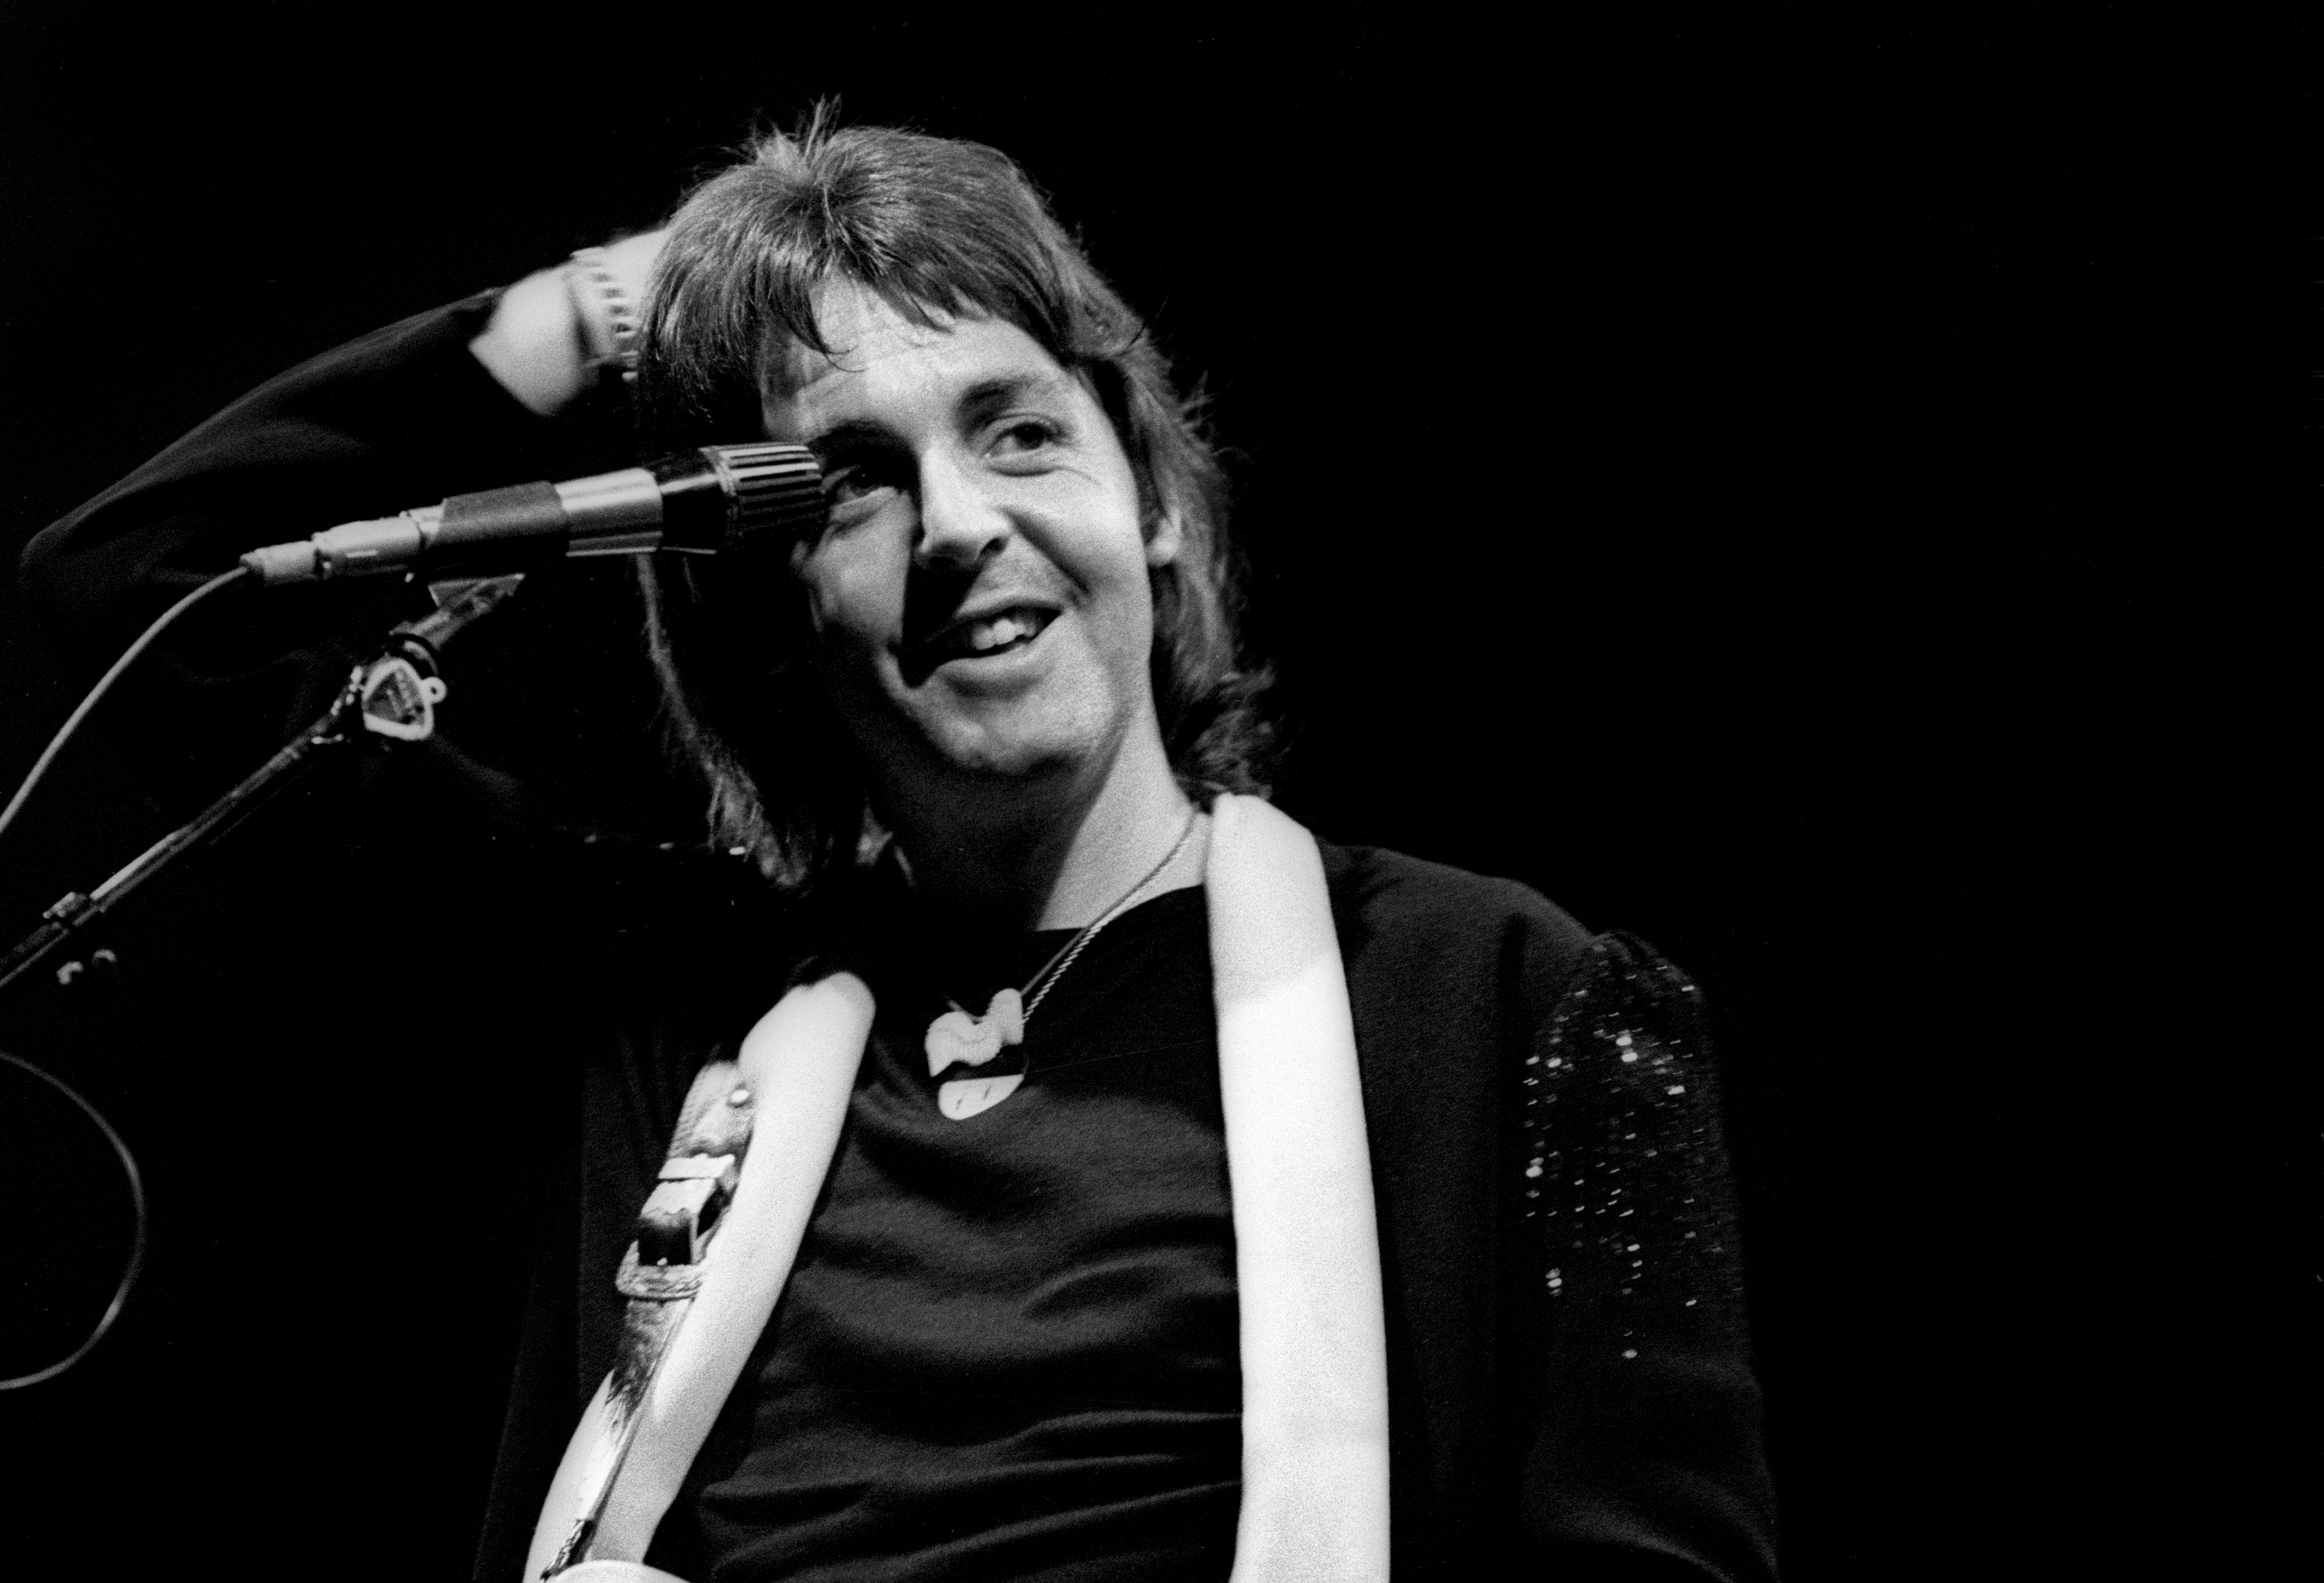 Paul McCartney Revealed He and Wings Would Randomly Pull Up to Colleges and Perform ‘Instant Gigs’